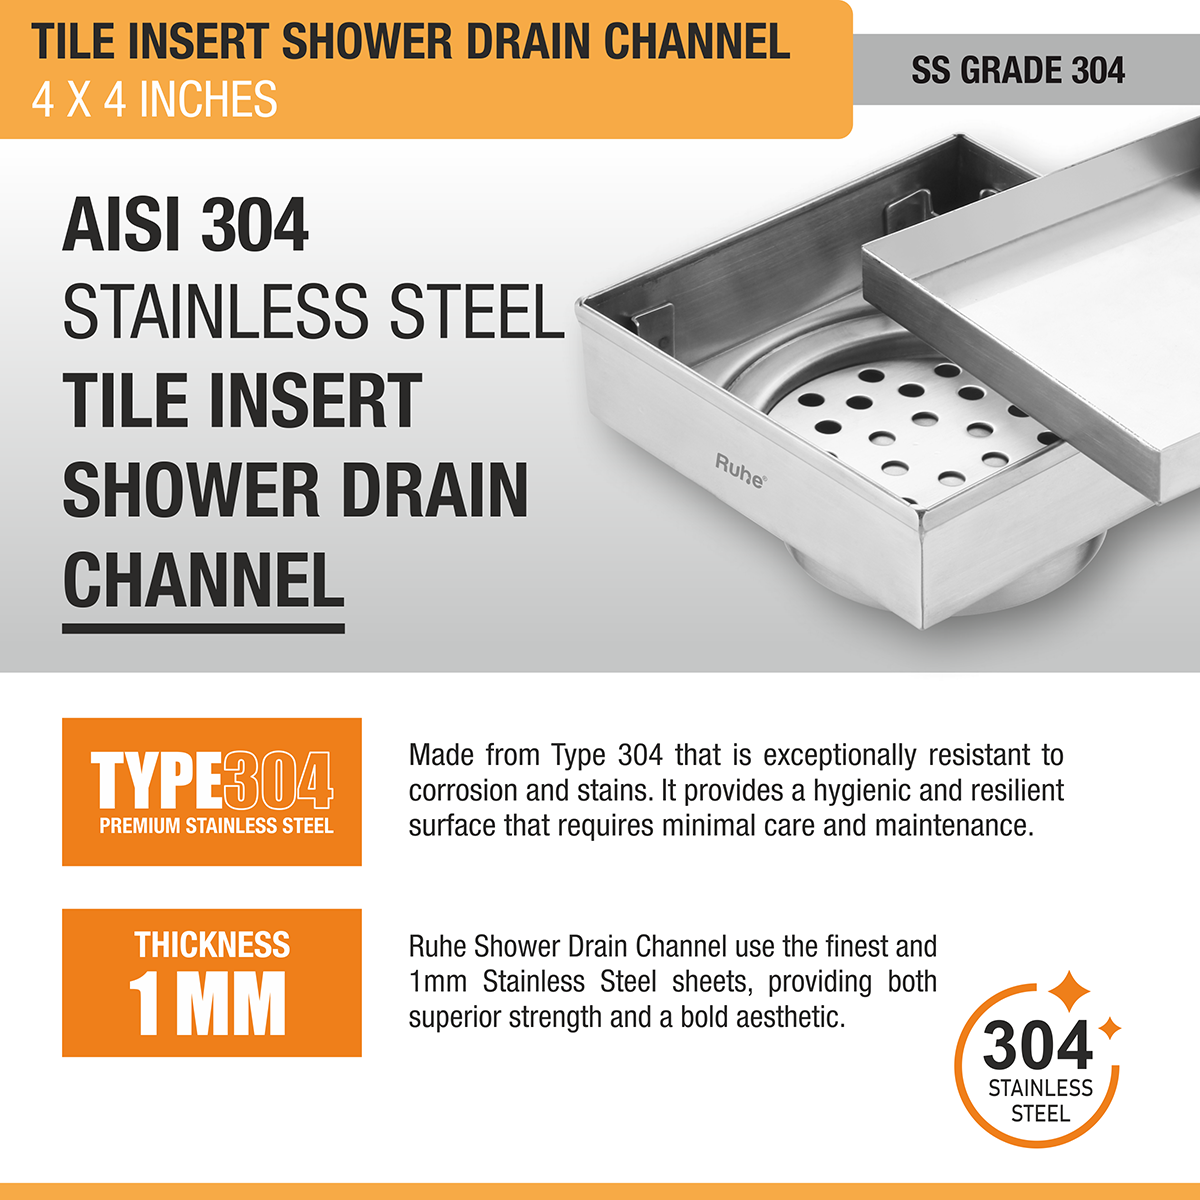 Tile Insert Shower Drain Channel (4 x 4 Inches) with Cockroach Trap (304 Grade) stainless steel